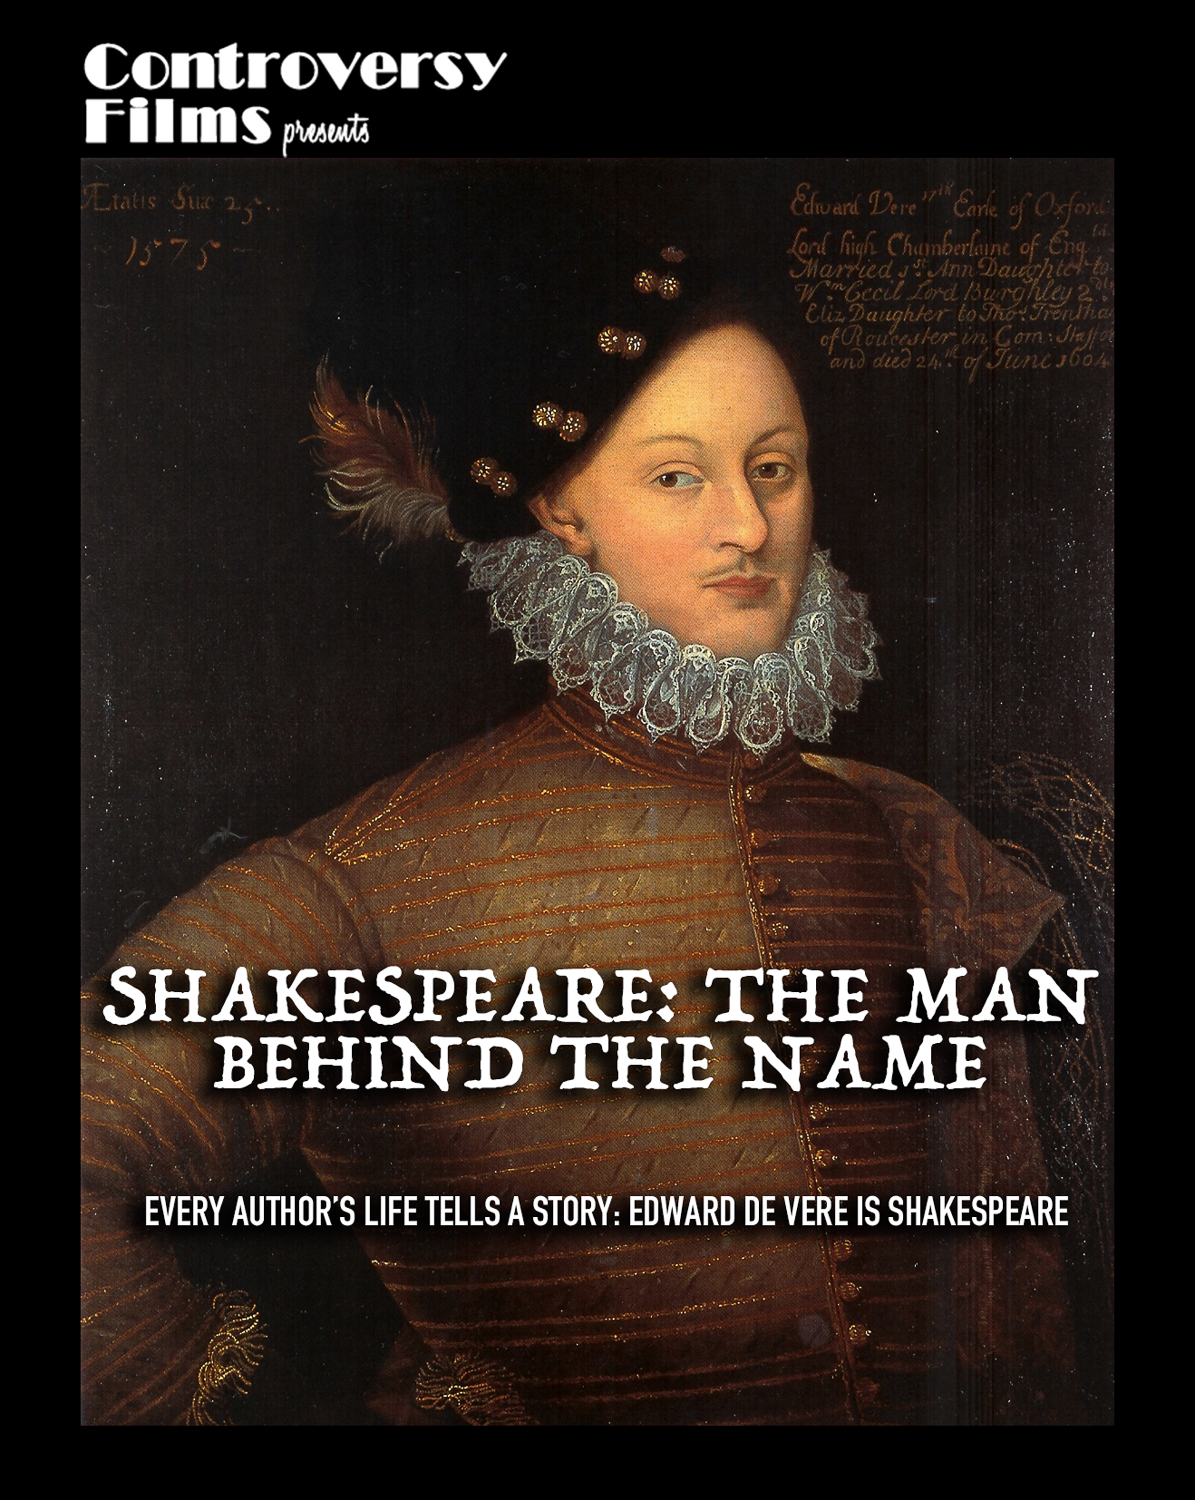 Movie poster for Shakespeare: The Man Behind the Name - image of shakespeare